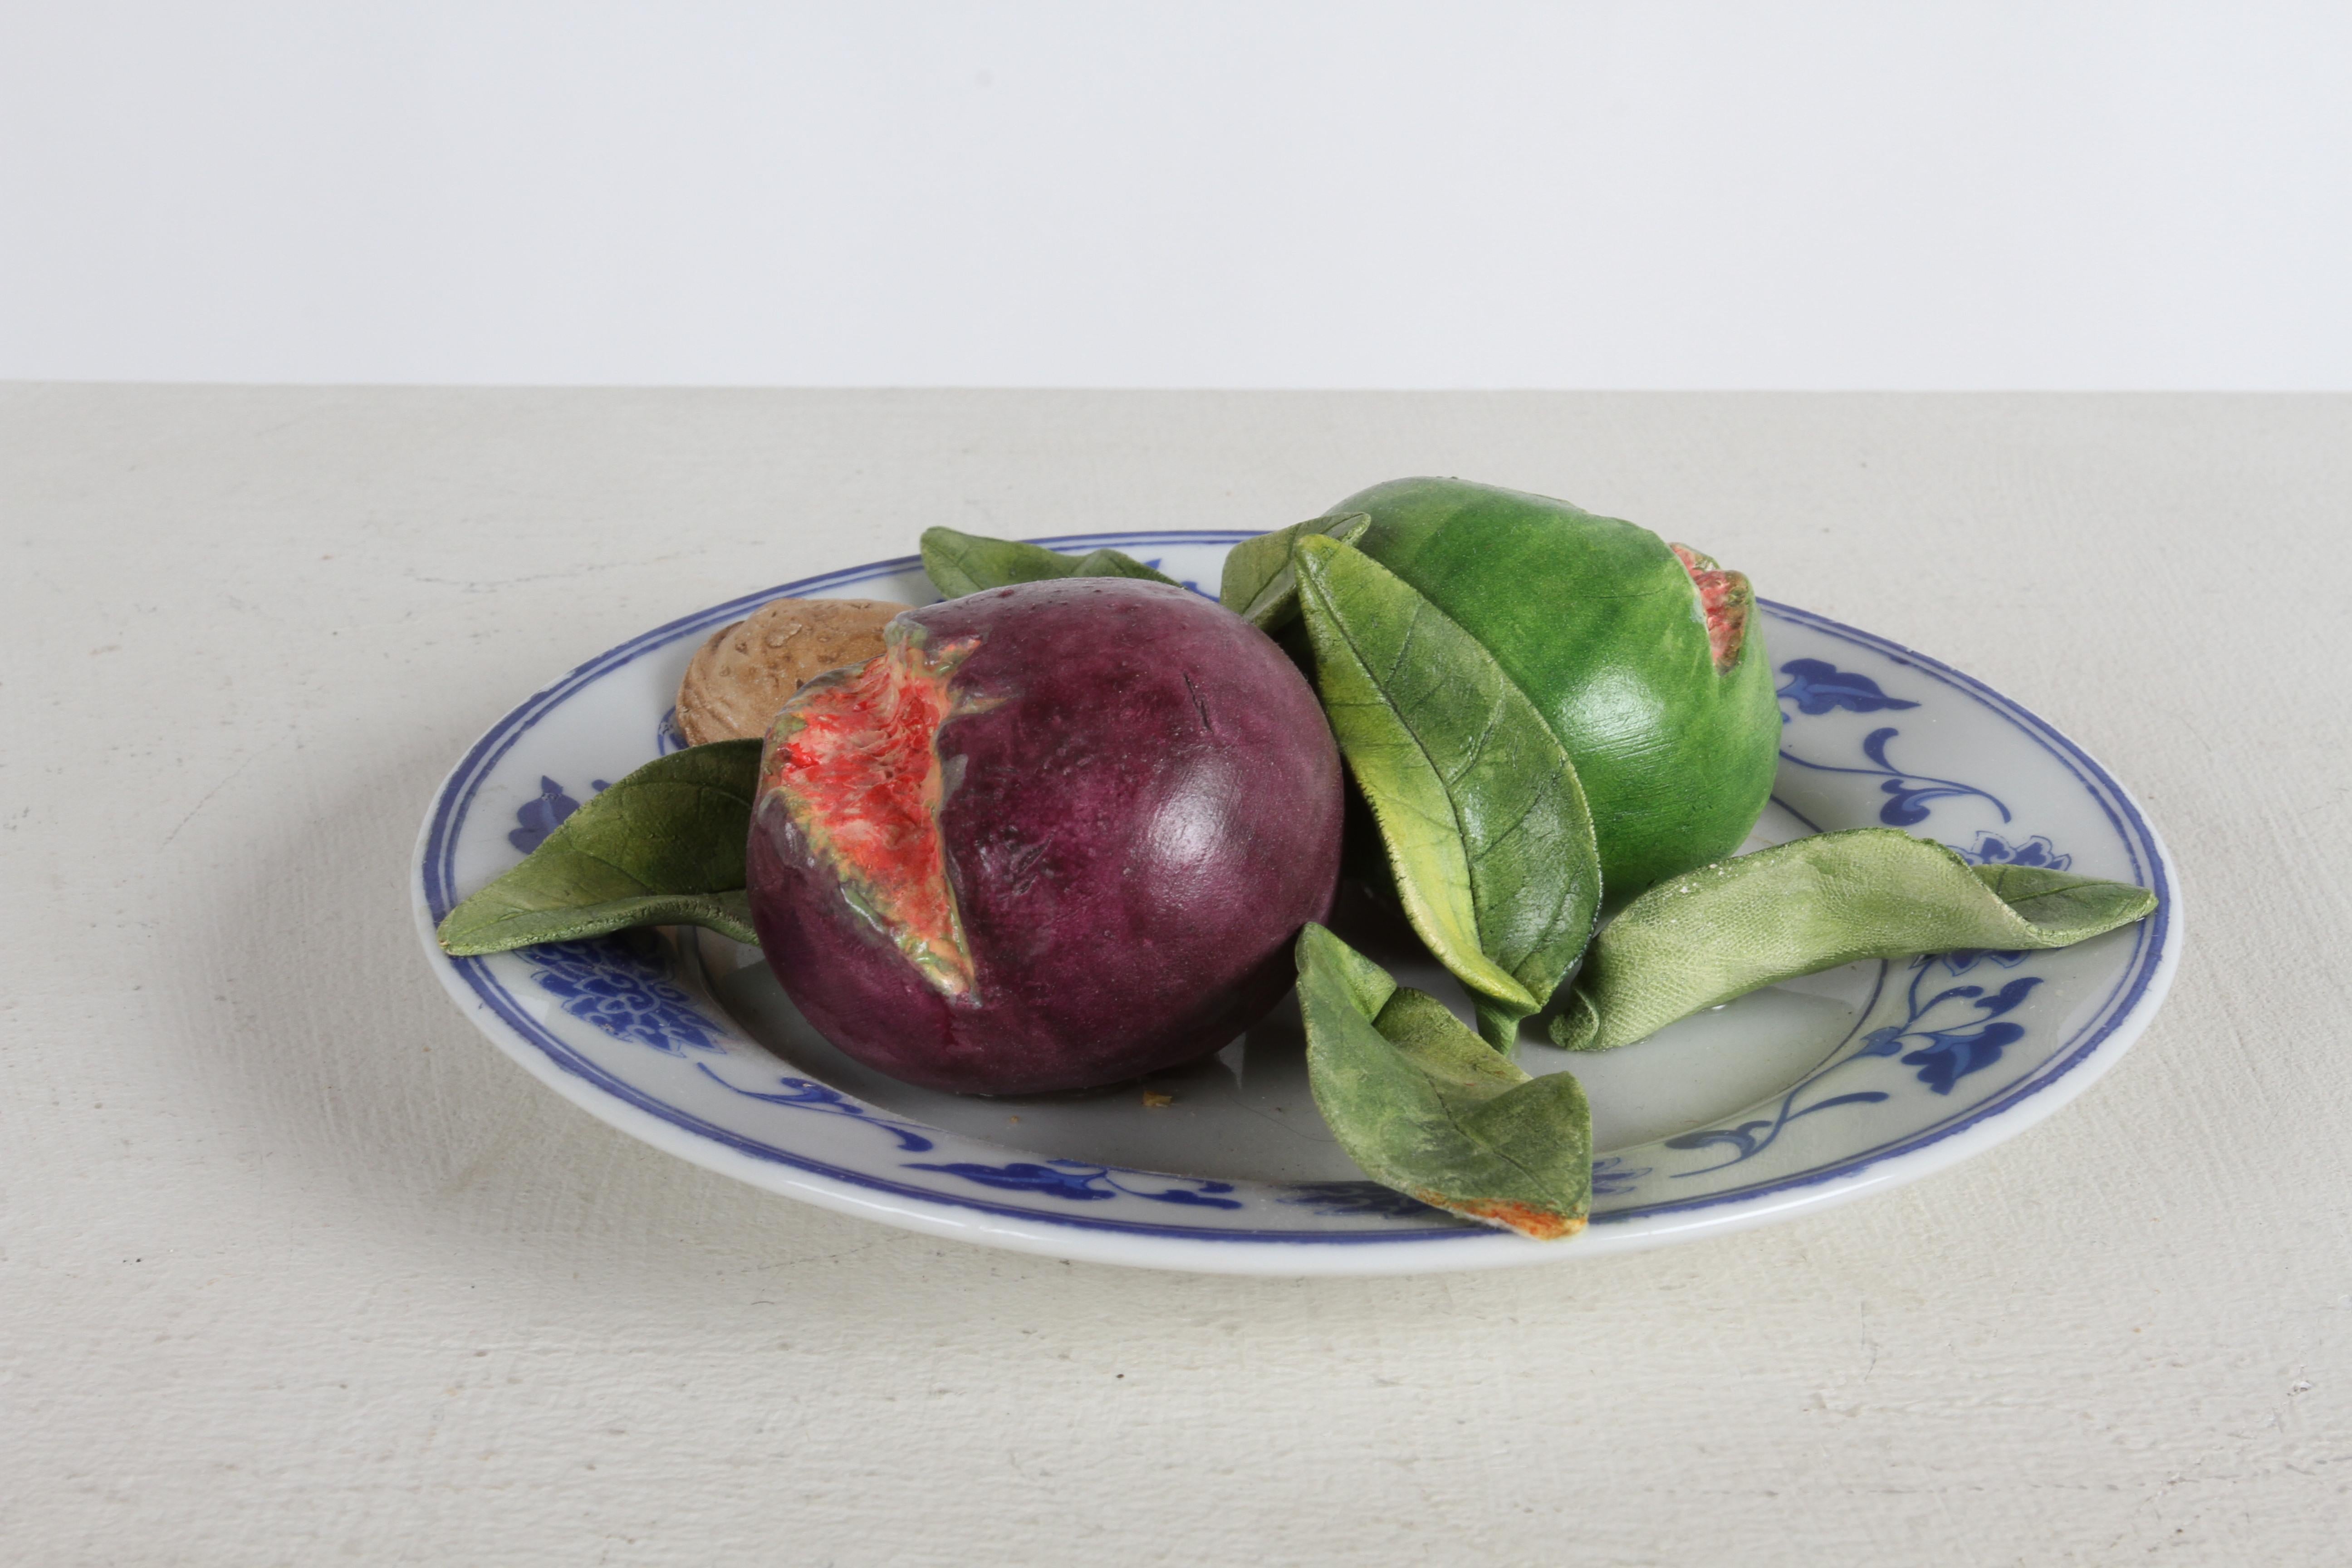  Trompe L'oeil majolica platter, hand crafted art plate of Star Apple fruit and leaves is on vintage china signed Christine Viennet on verso. My guess this is from late 1970s or early 80s, based from the estate it was purchased from. 

Christine